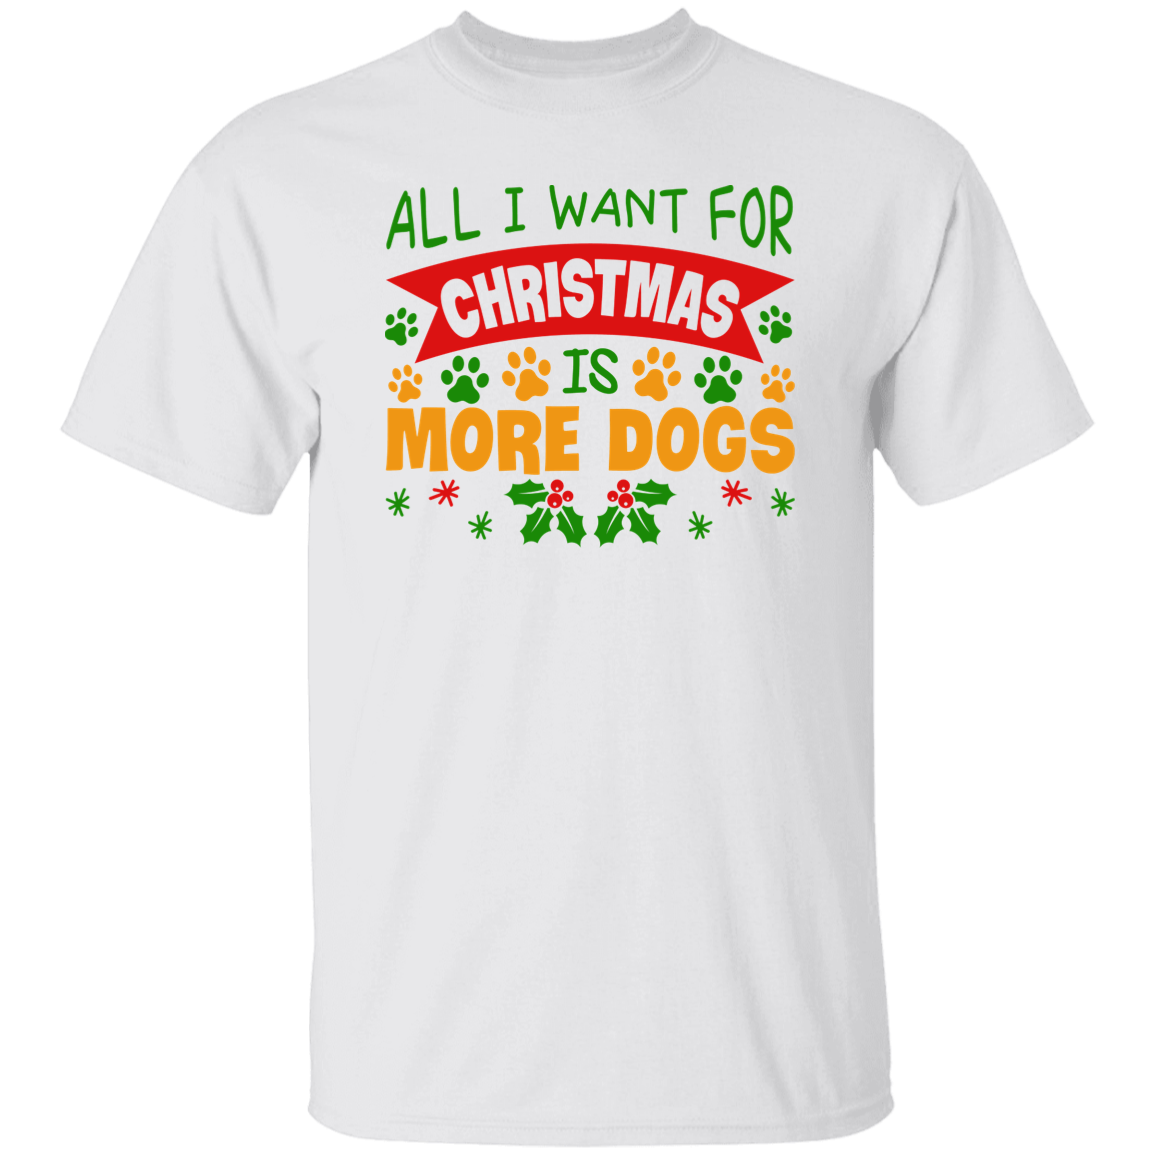 All I Want for Christmas is More Dogs T-Shirt